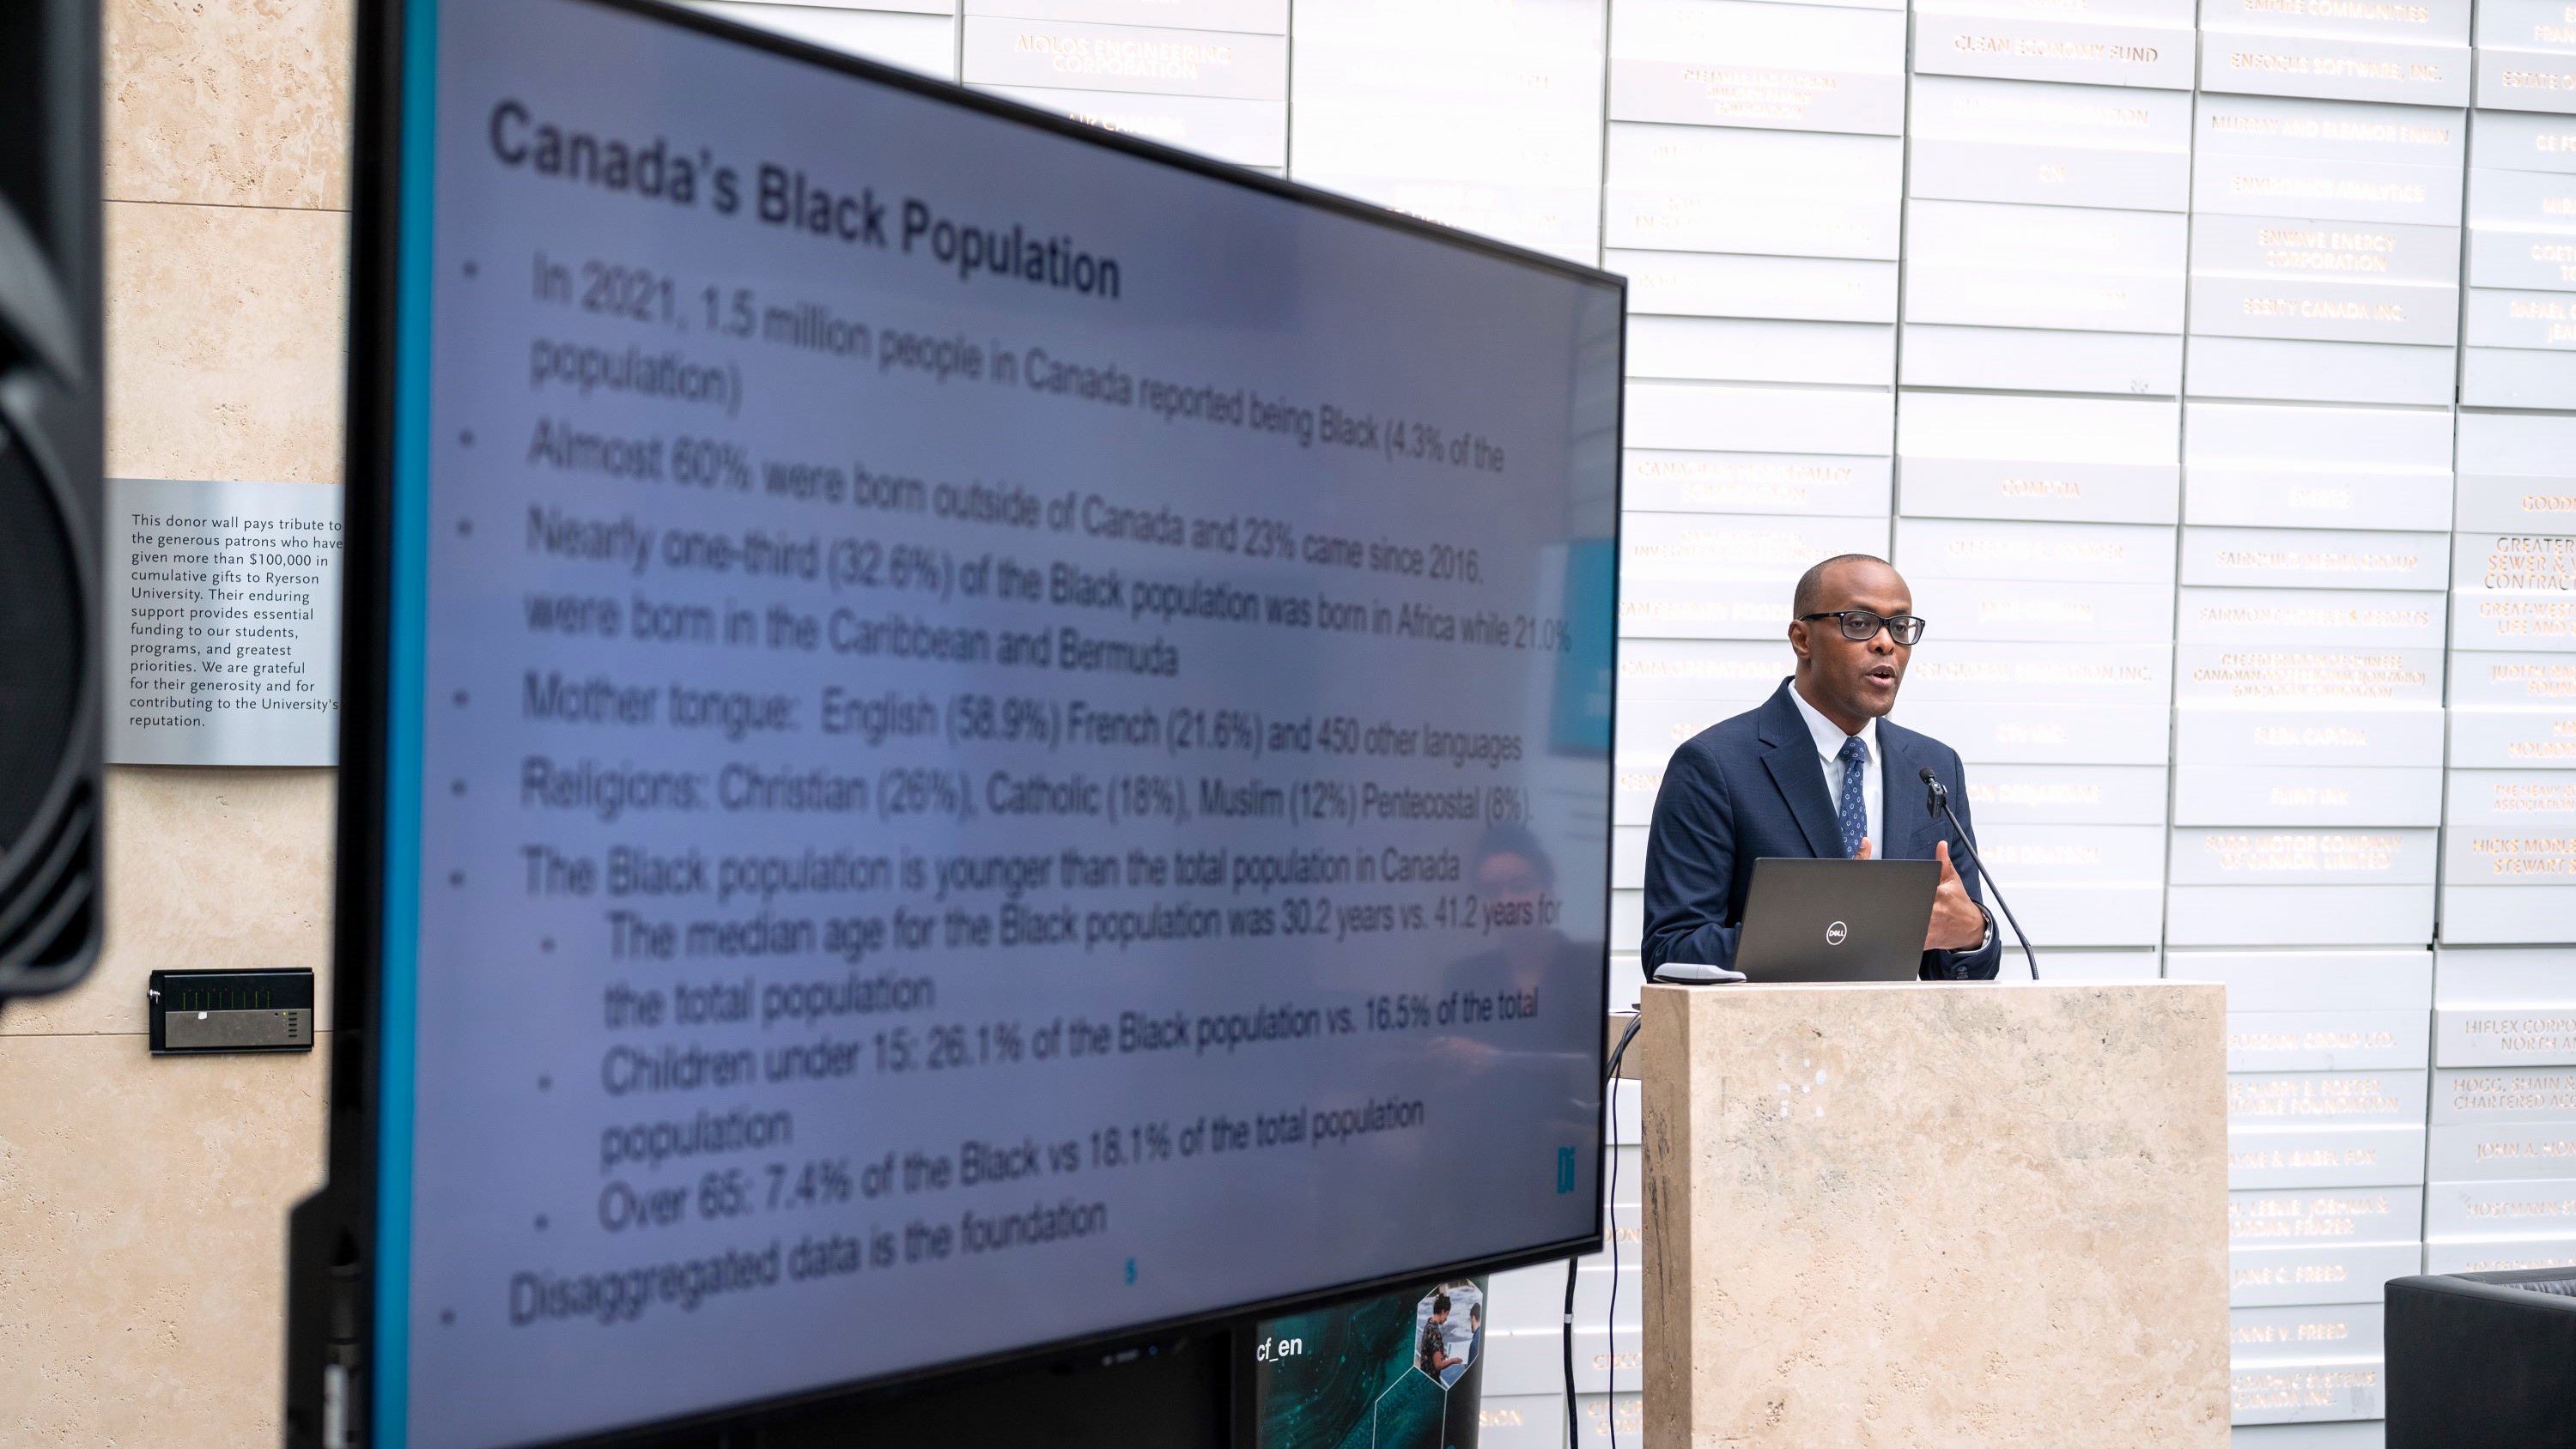 A Black man standing on a podium speaking, with a slide on the screen beside him that says Canada's Black Population.